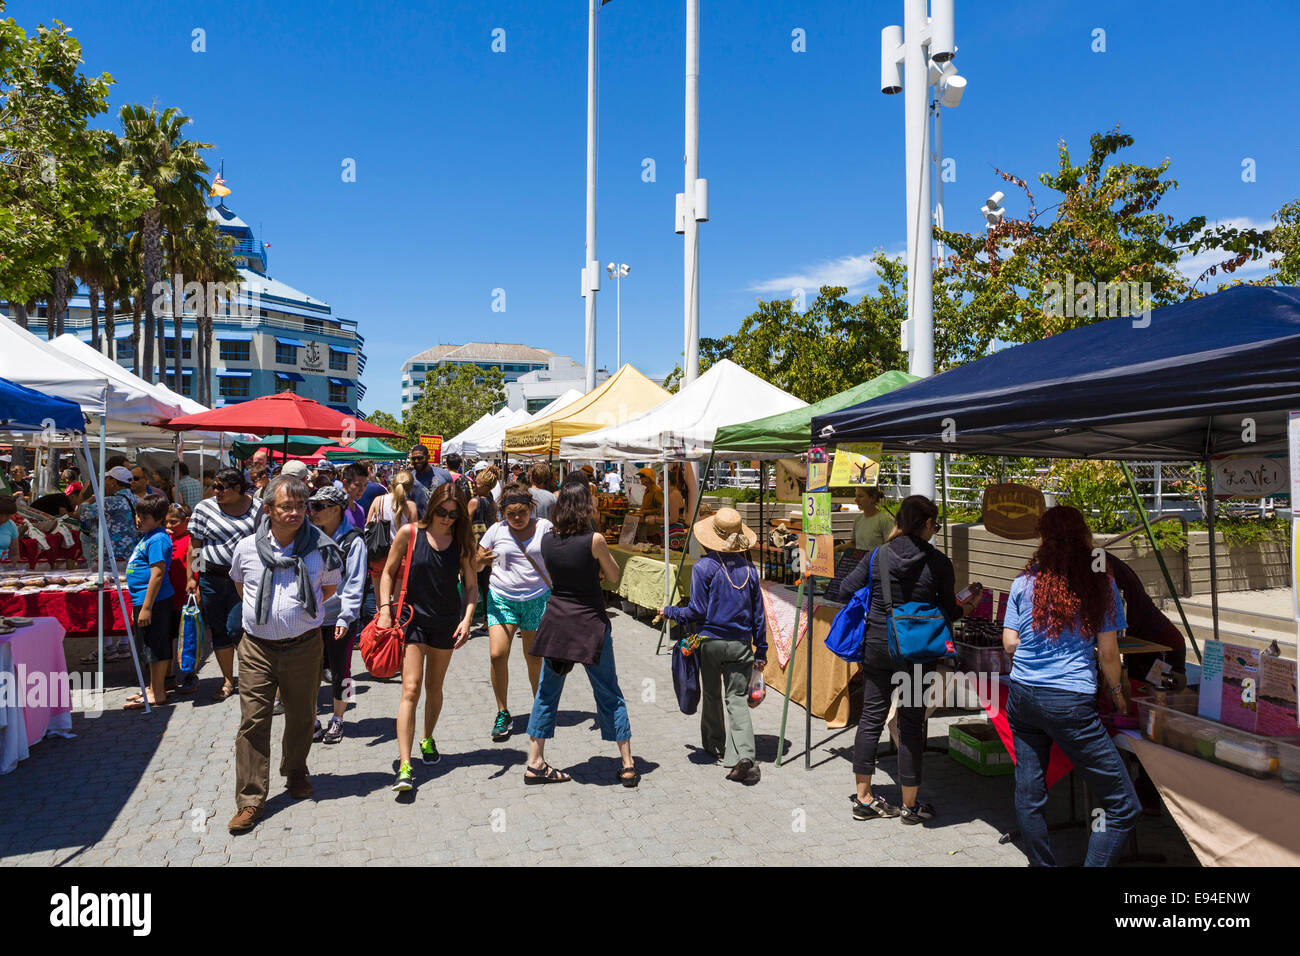 Market stalls along the waterfront in Jack London Square district, Oakland, California, USA Stock Photo